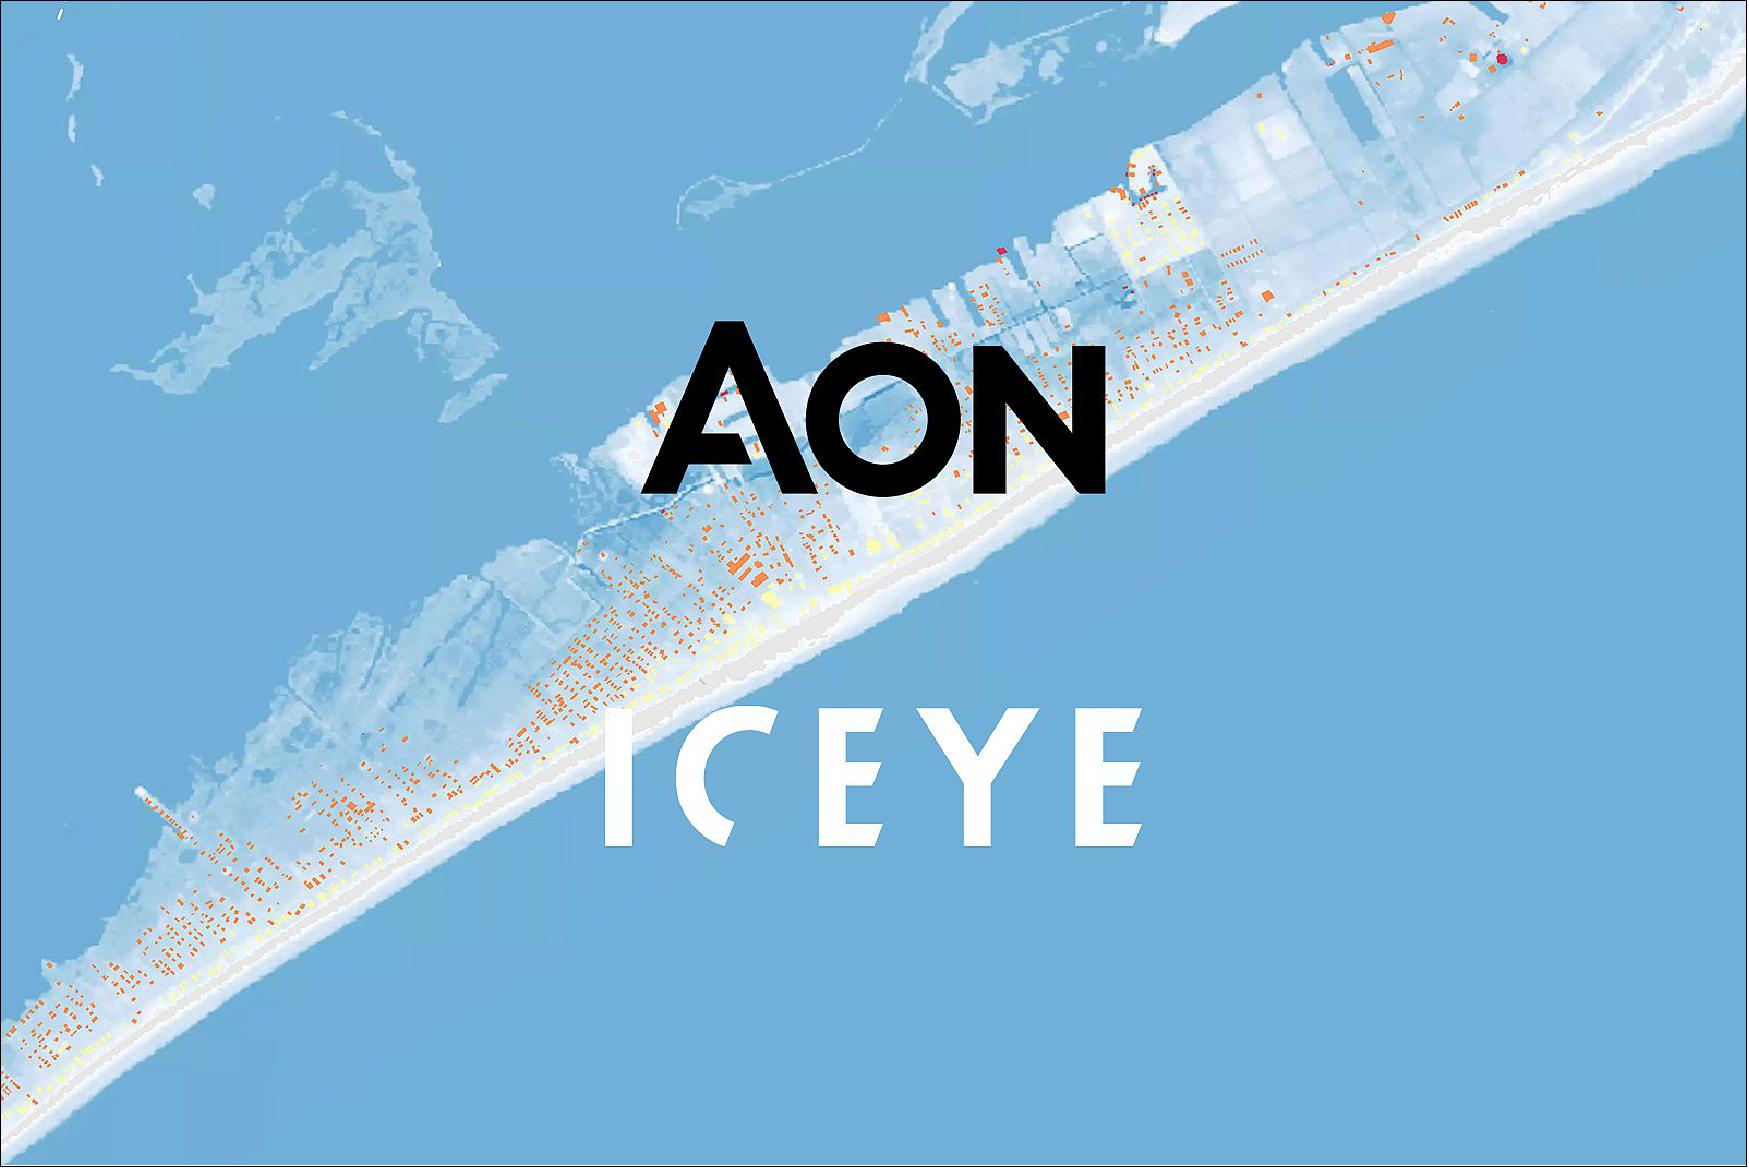 Figure 19: Aon plc and ICEYE logos with flood extent visualization in the background (image credit: ICEYE)